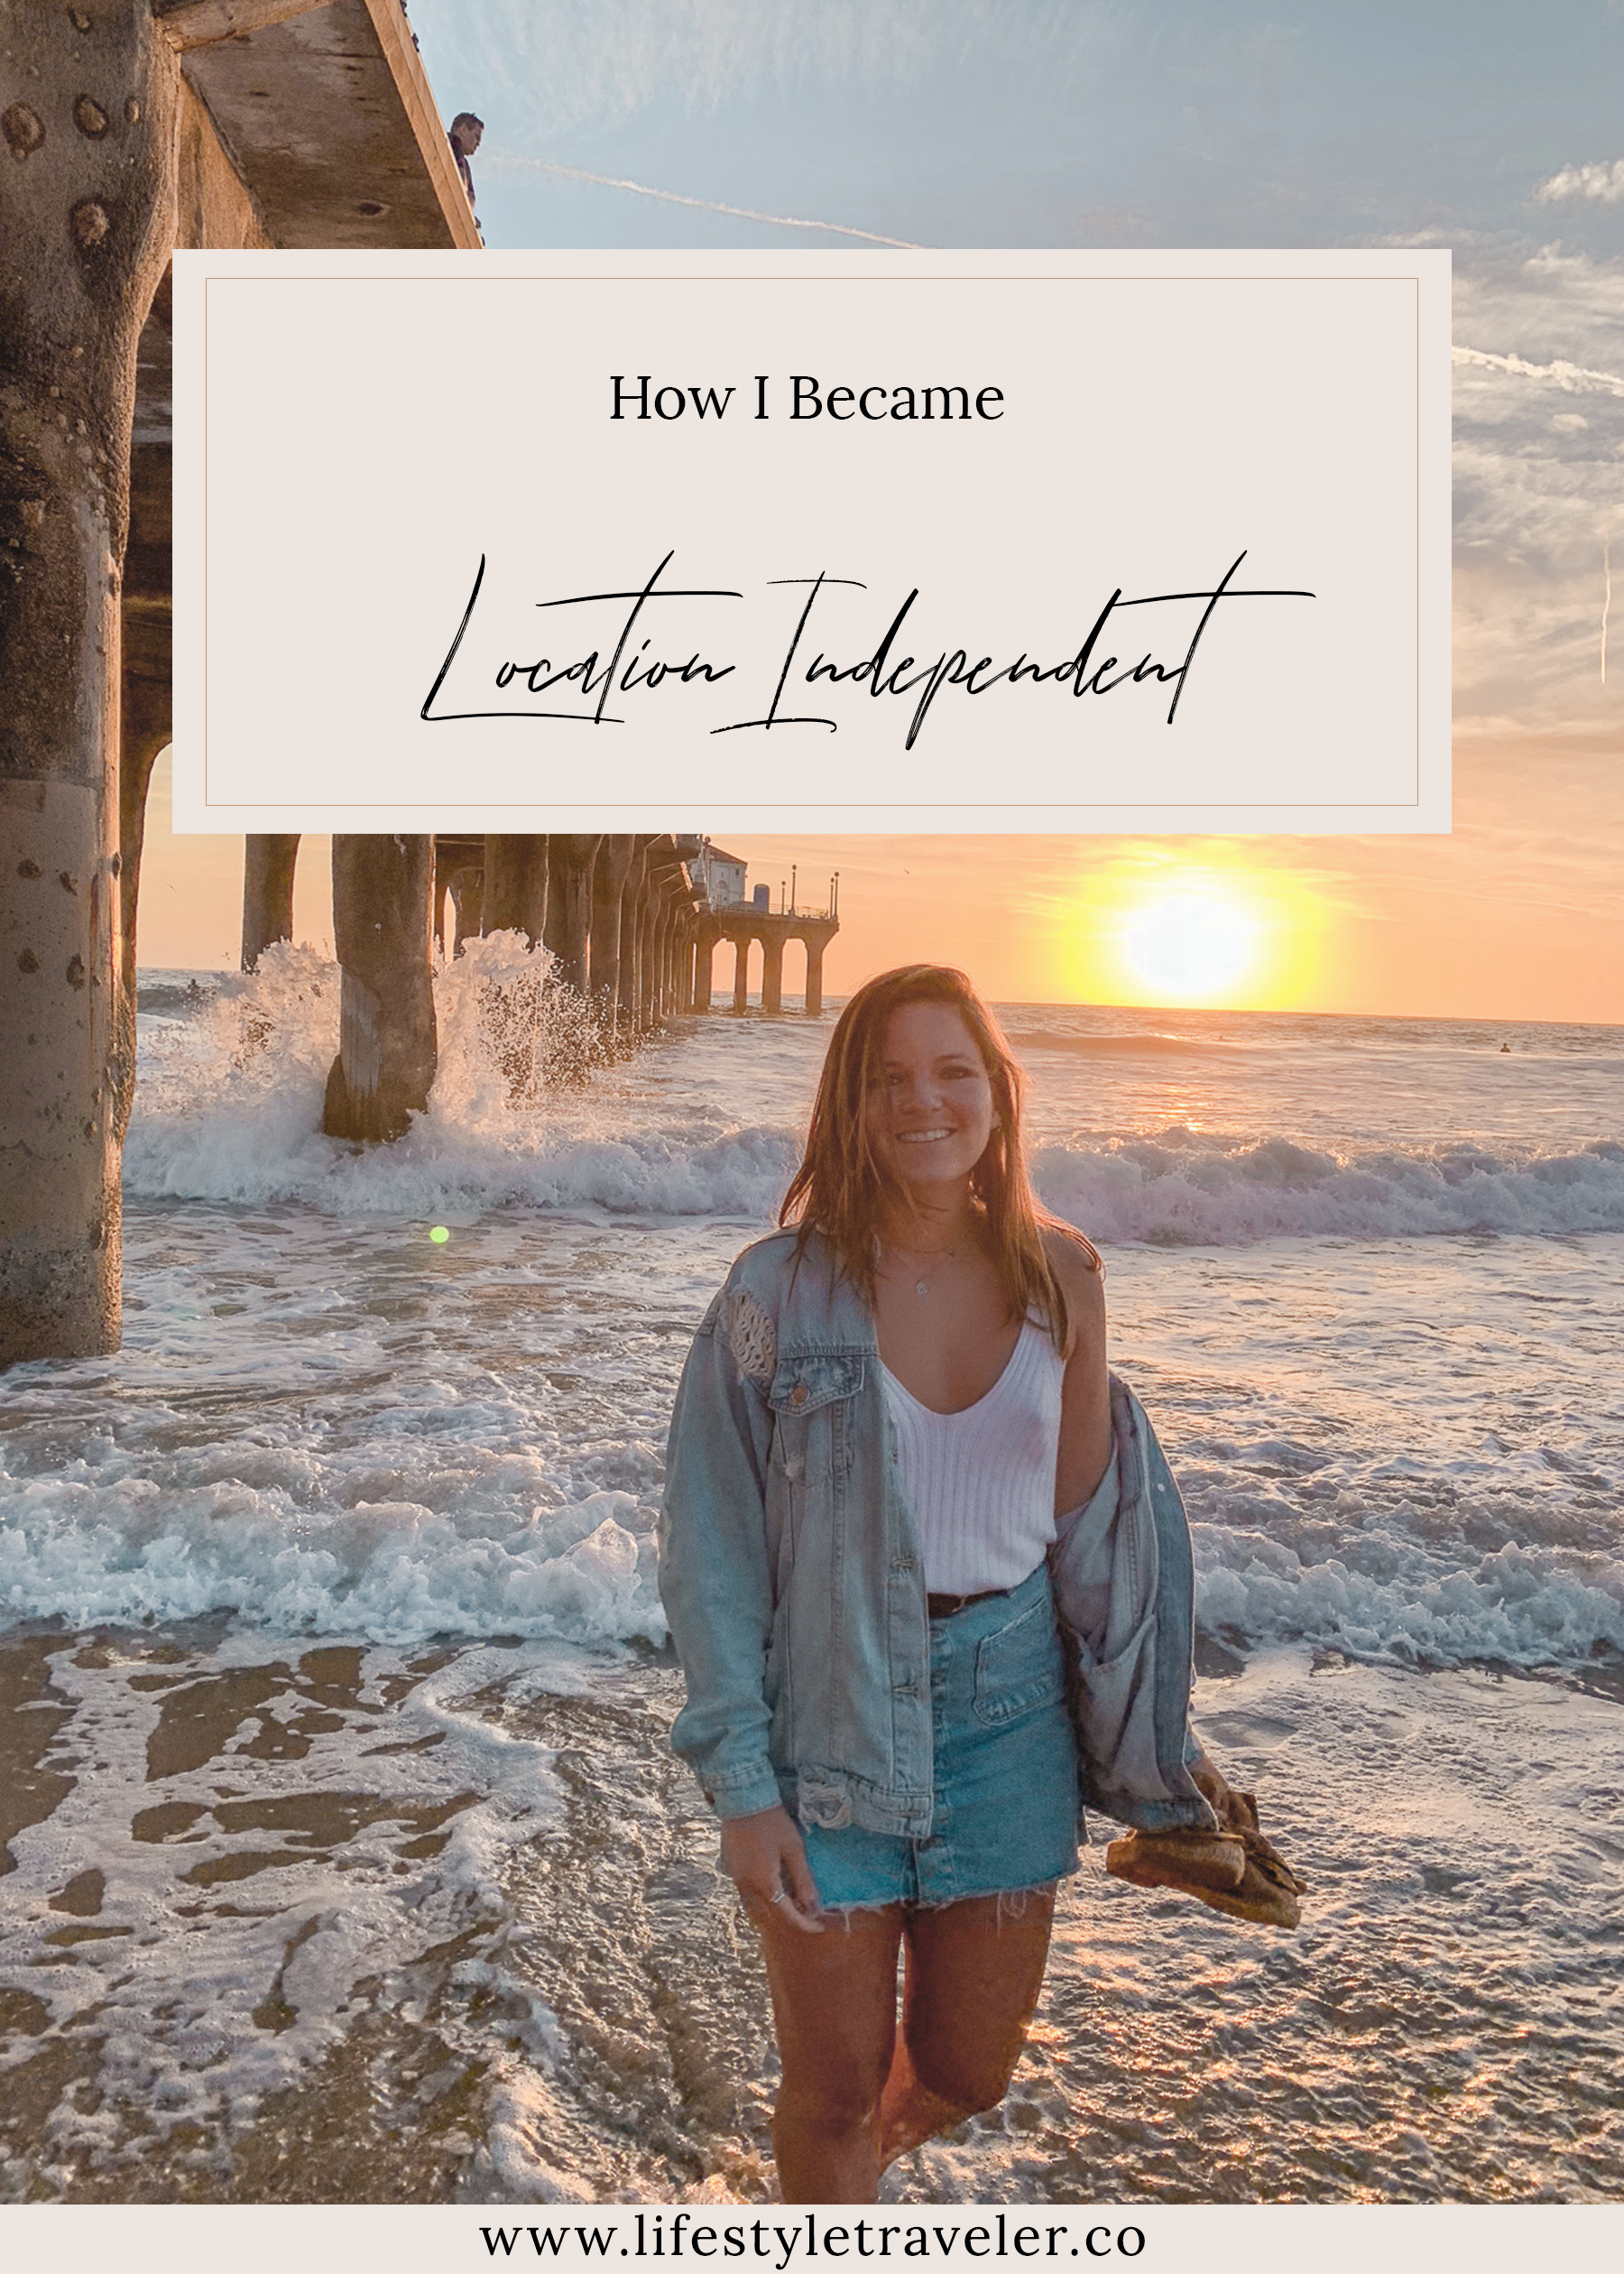 How I Became Location Independent | lifestyletraveler.co | IG: @lifestyletraveler.co